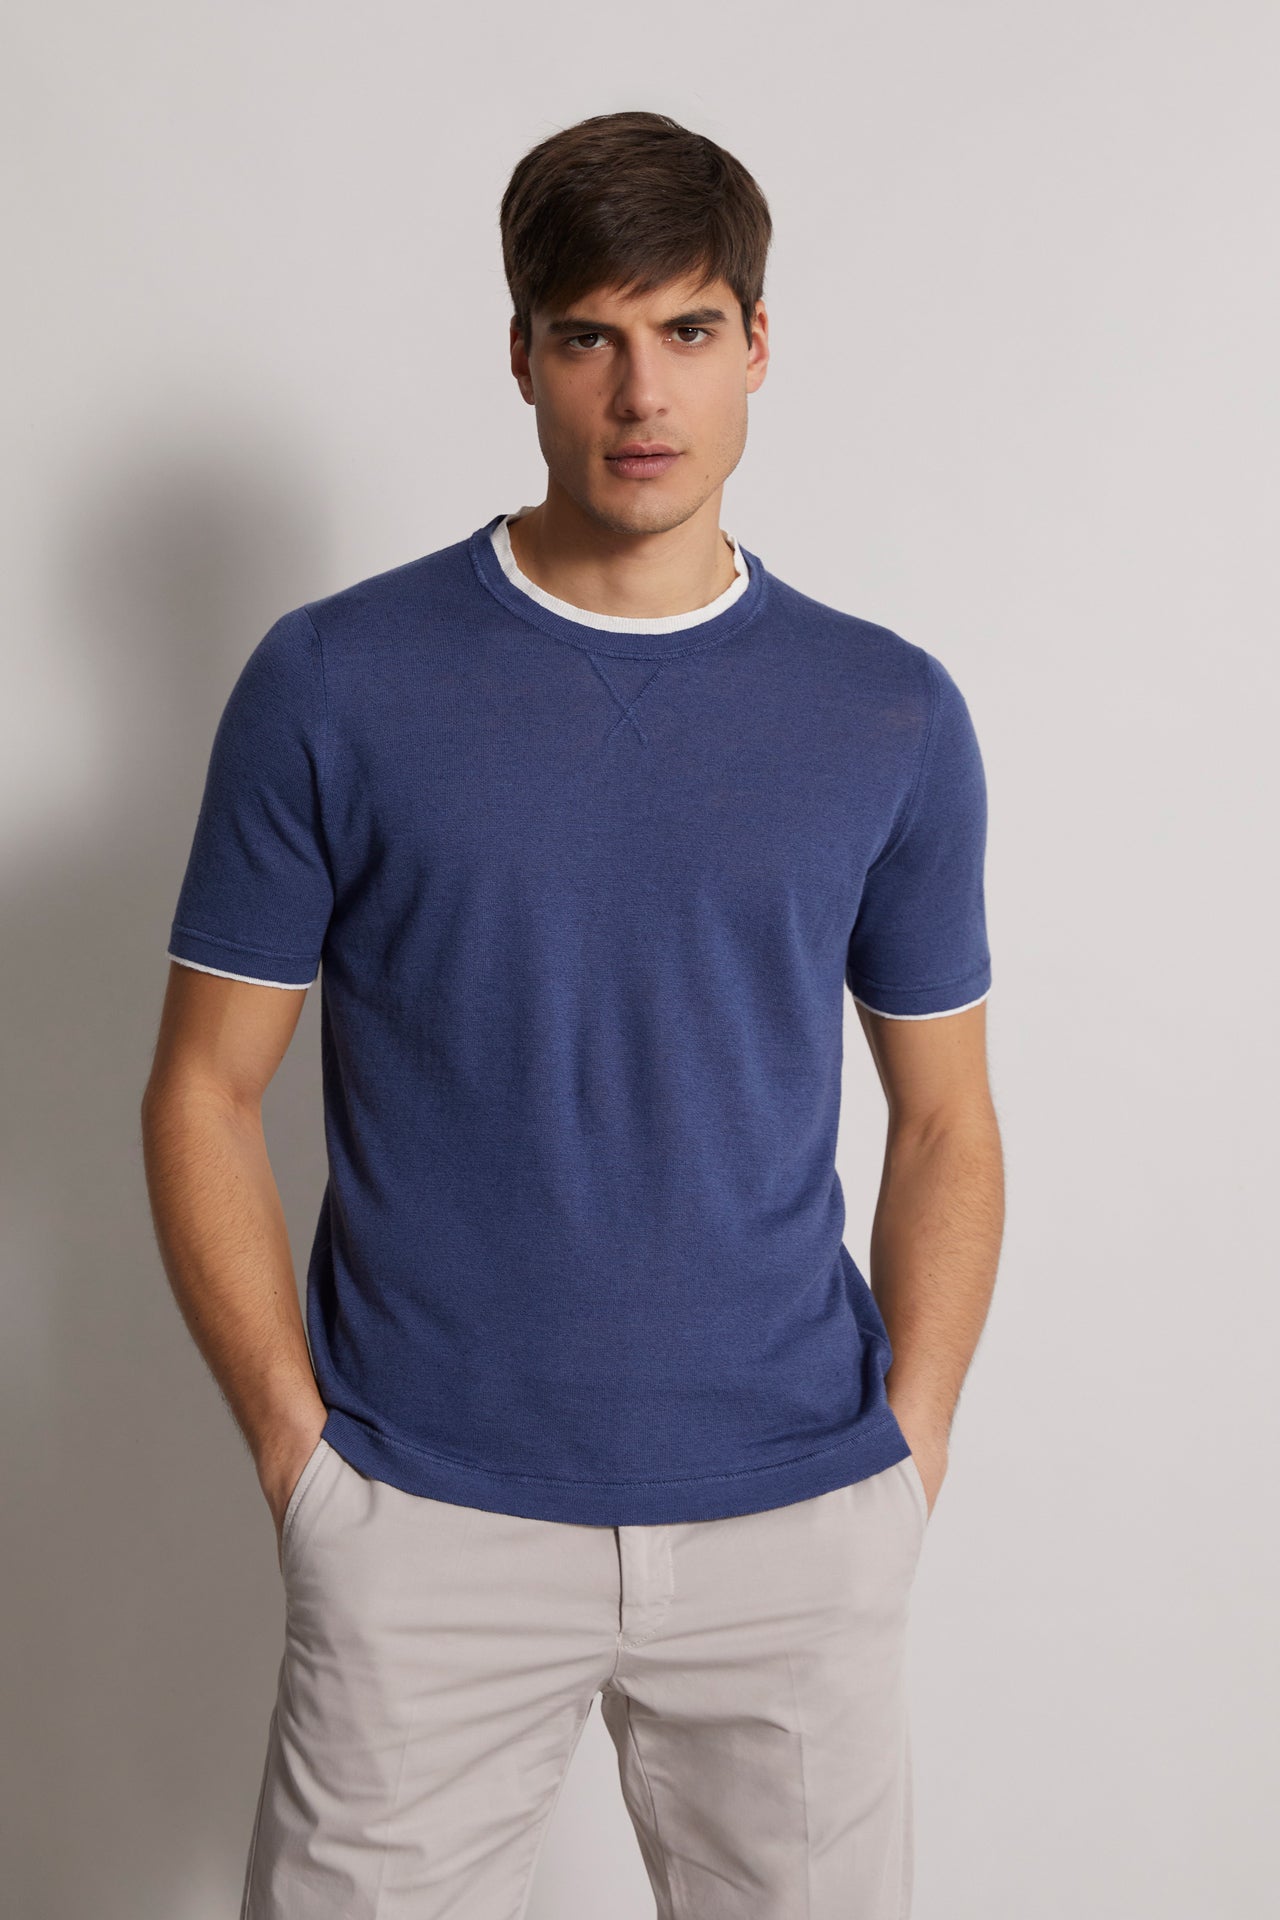 Fox Tropico knitted t-shirt in linen cotton